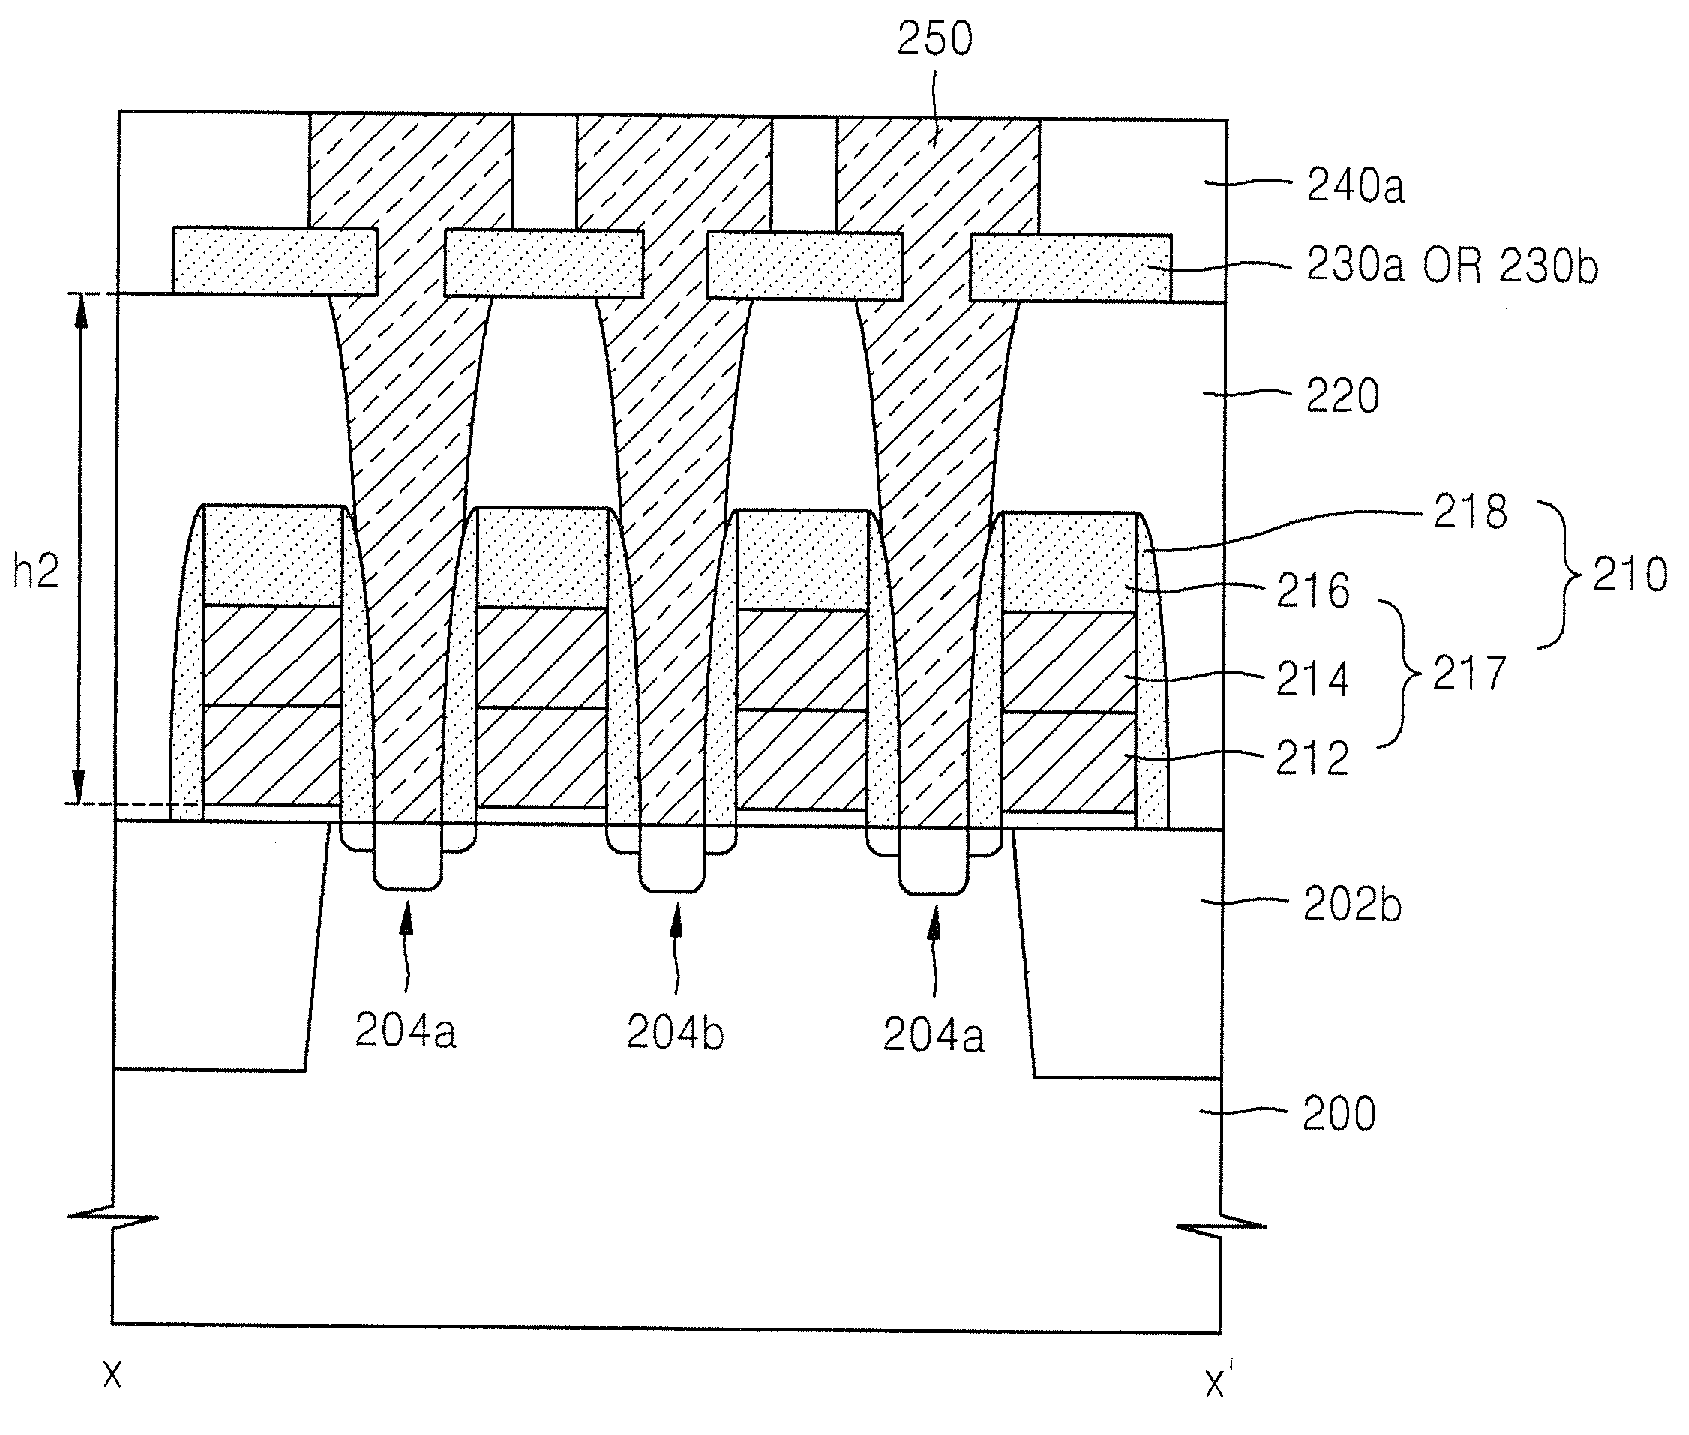 Method of manufacturing semiconductor device that includes forming self-aligned contact pad